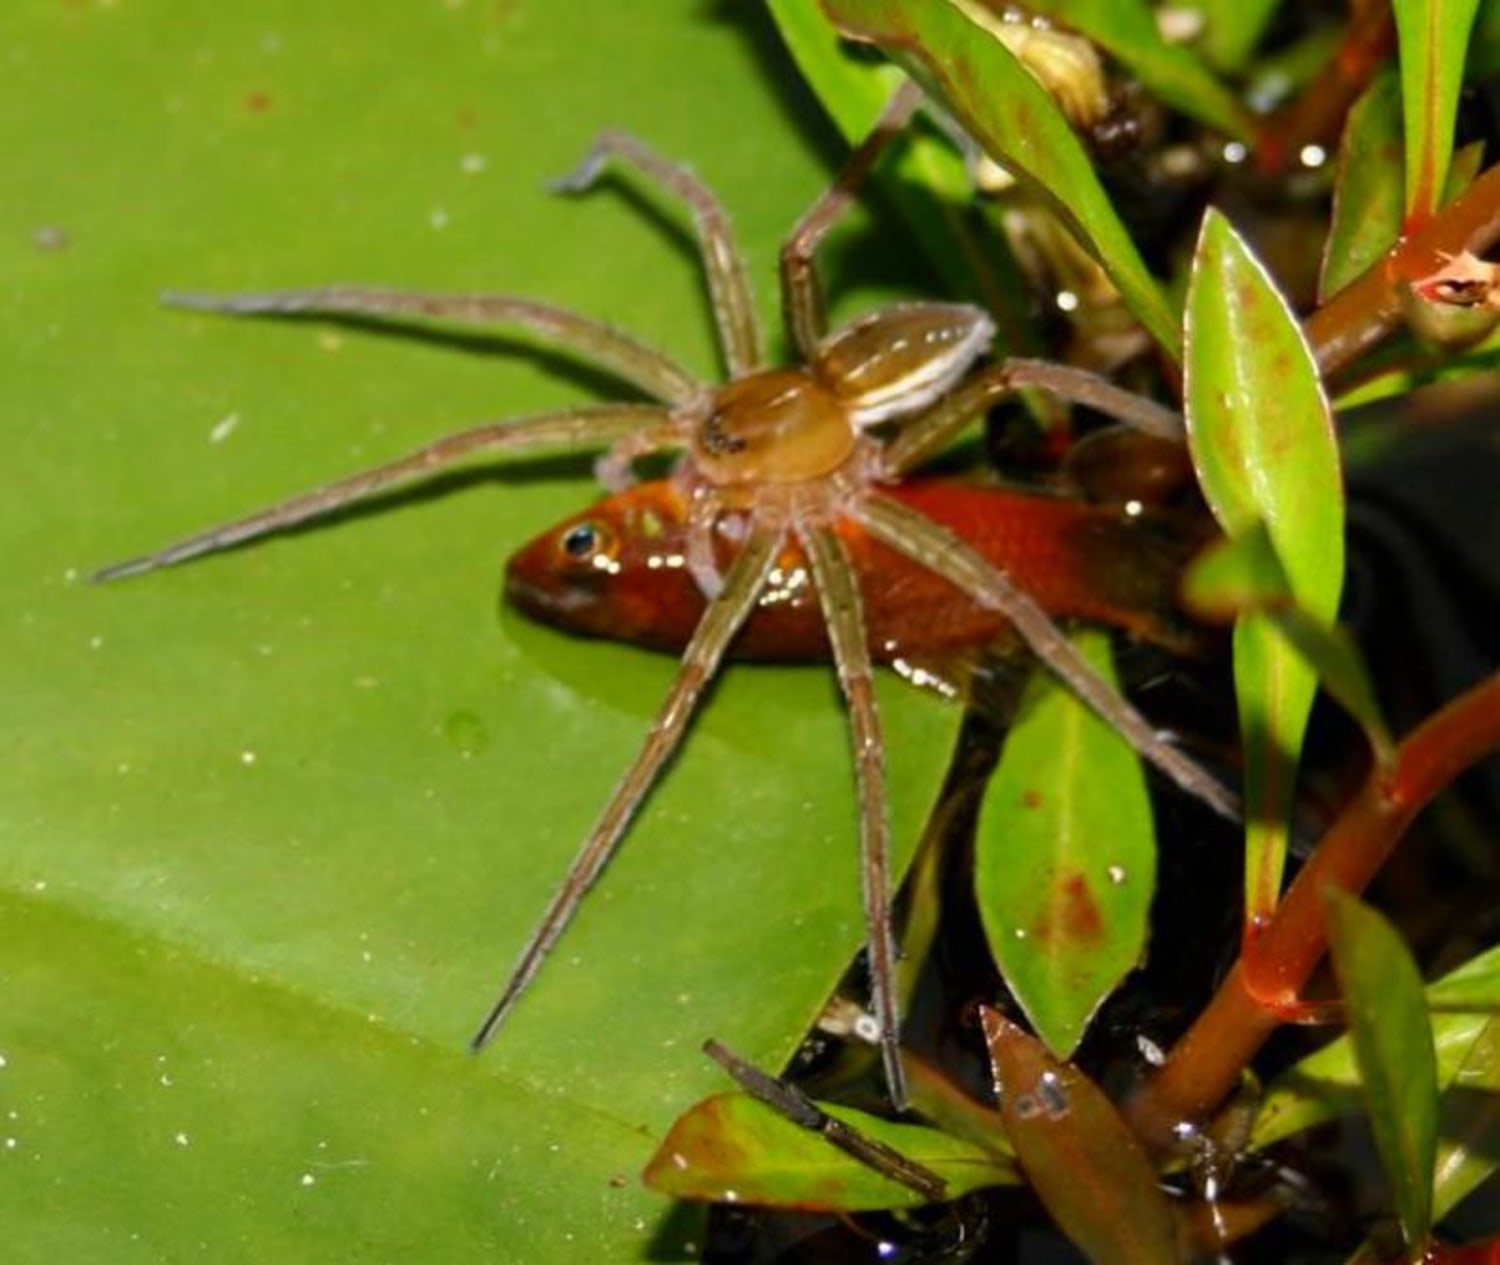 Fish-Eating Spiders Are Lurking Around the World